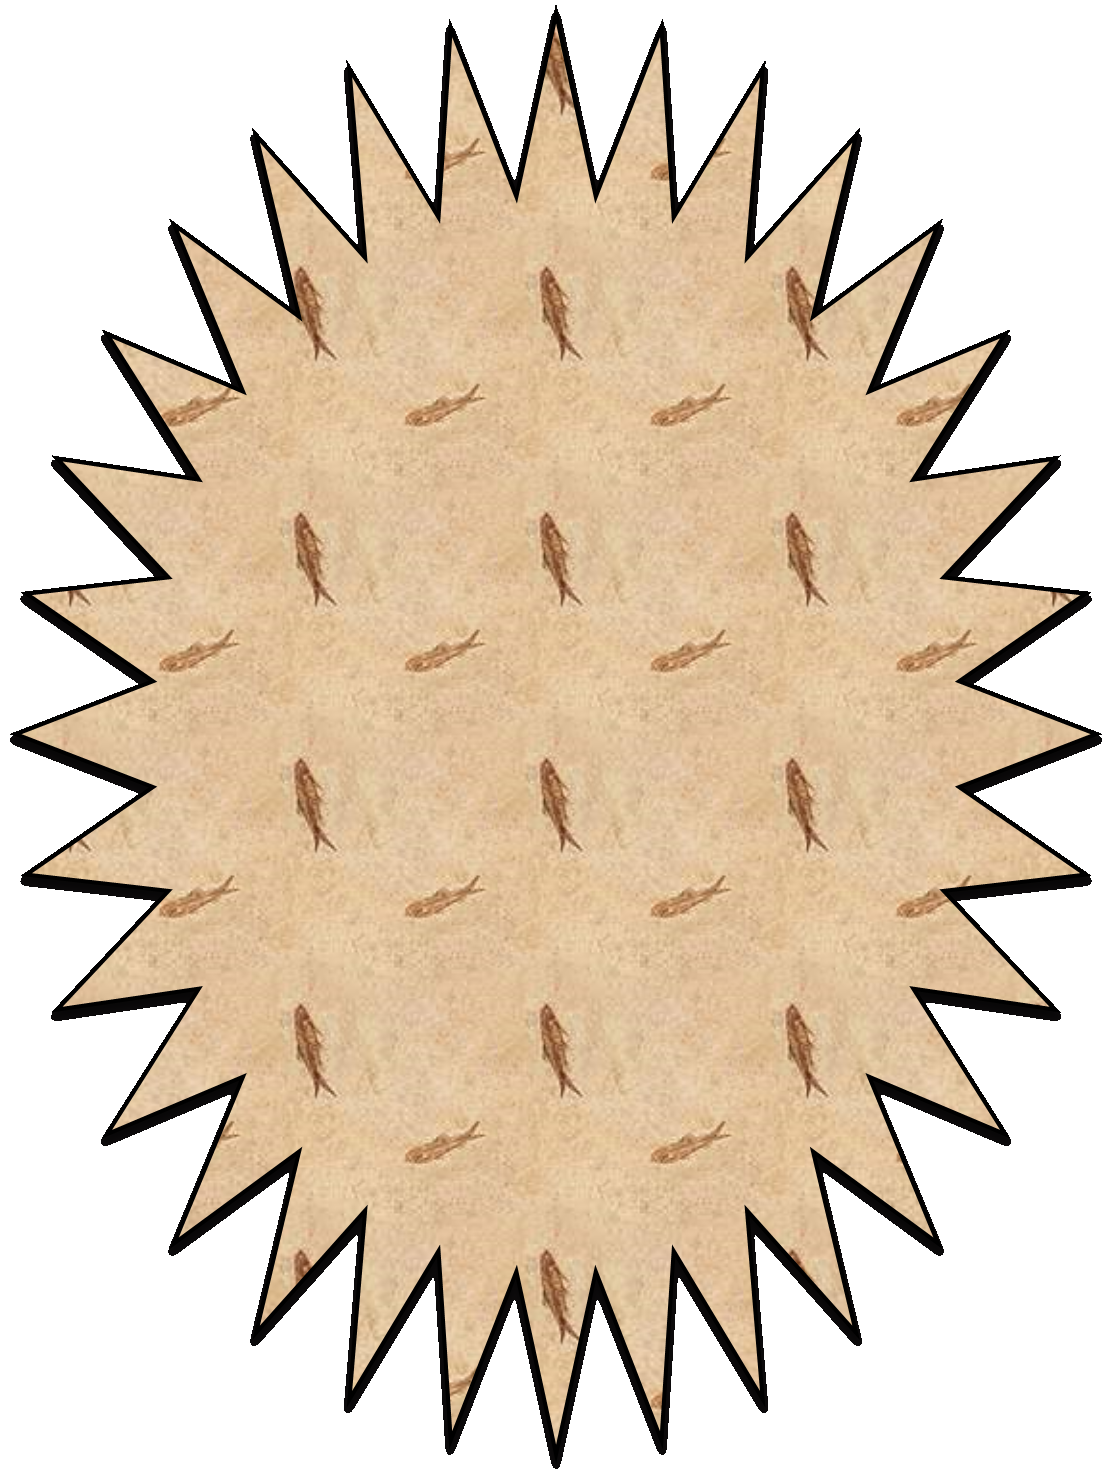 A spiky bubble shape with a repeating image of a fossilized fish as a background.